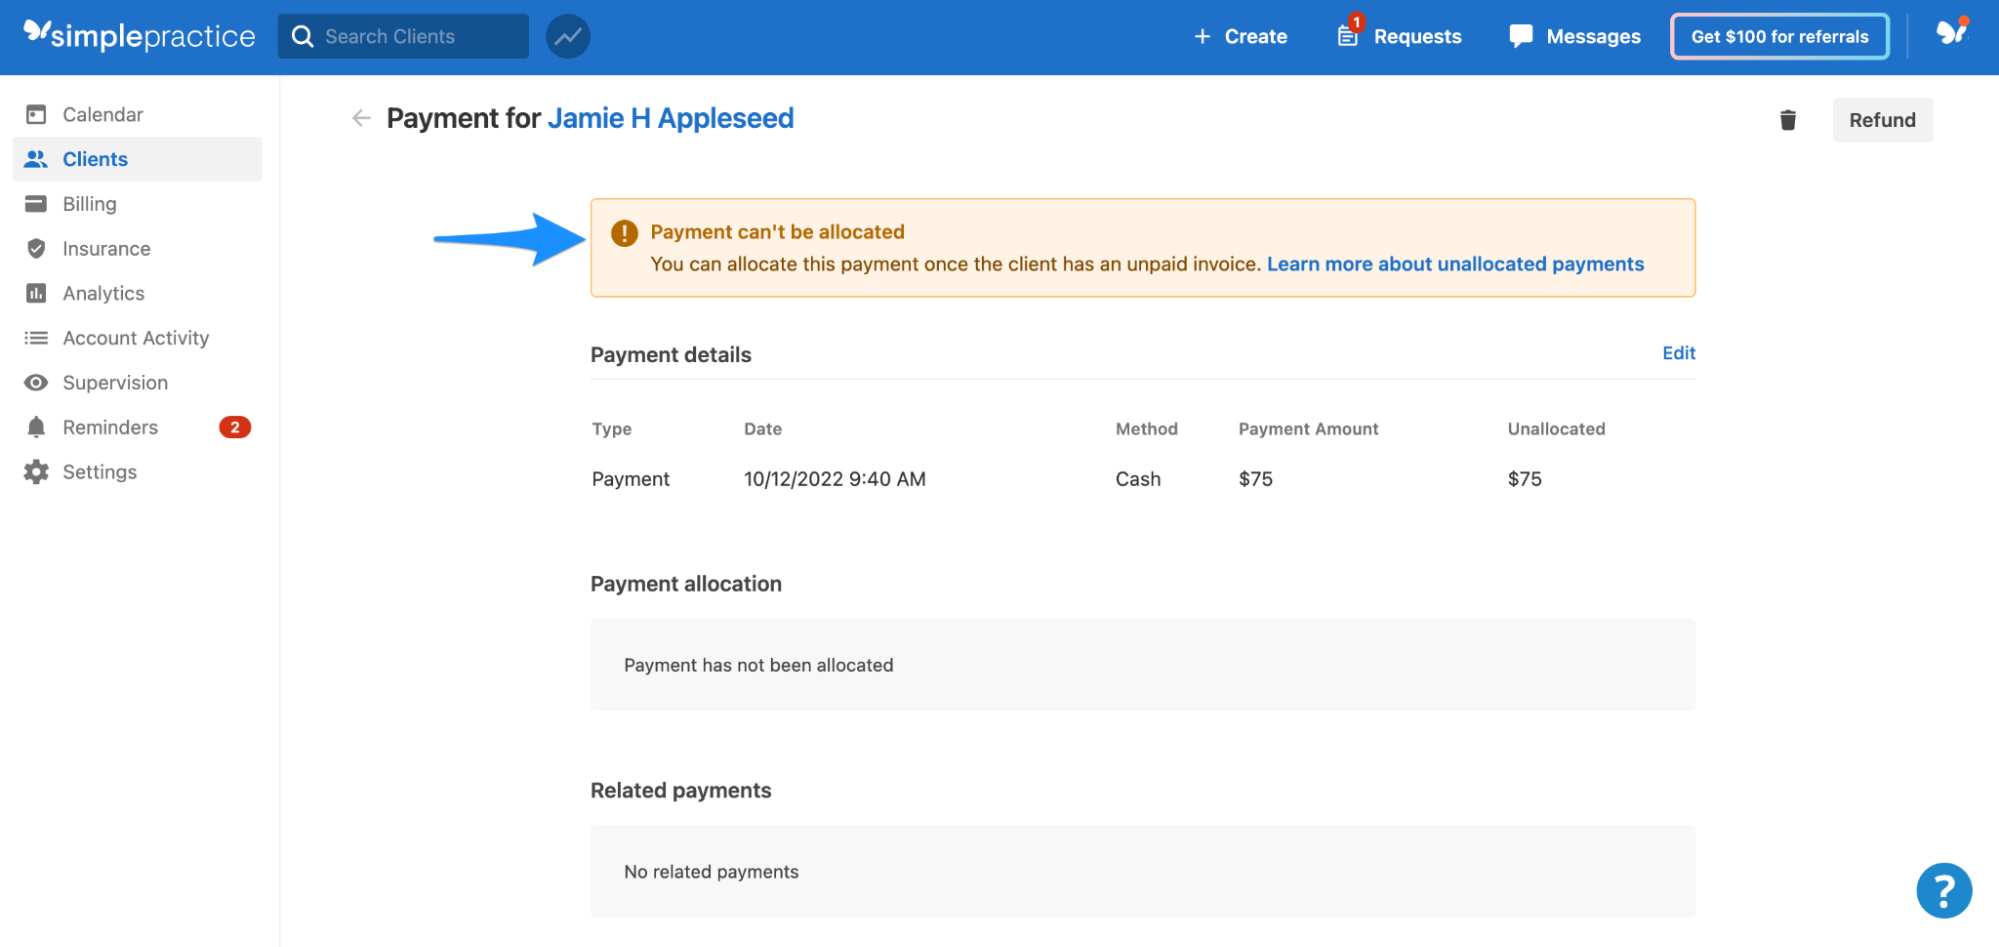 paymentcan_tbeallocated.simplepractice.billing.png